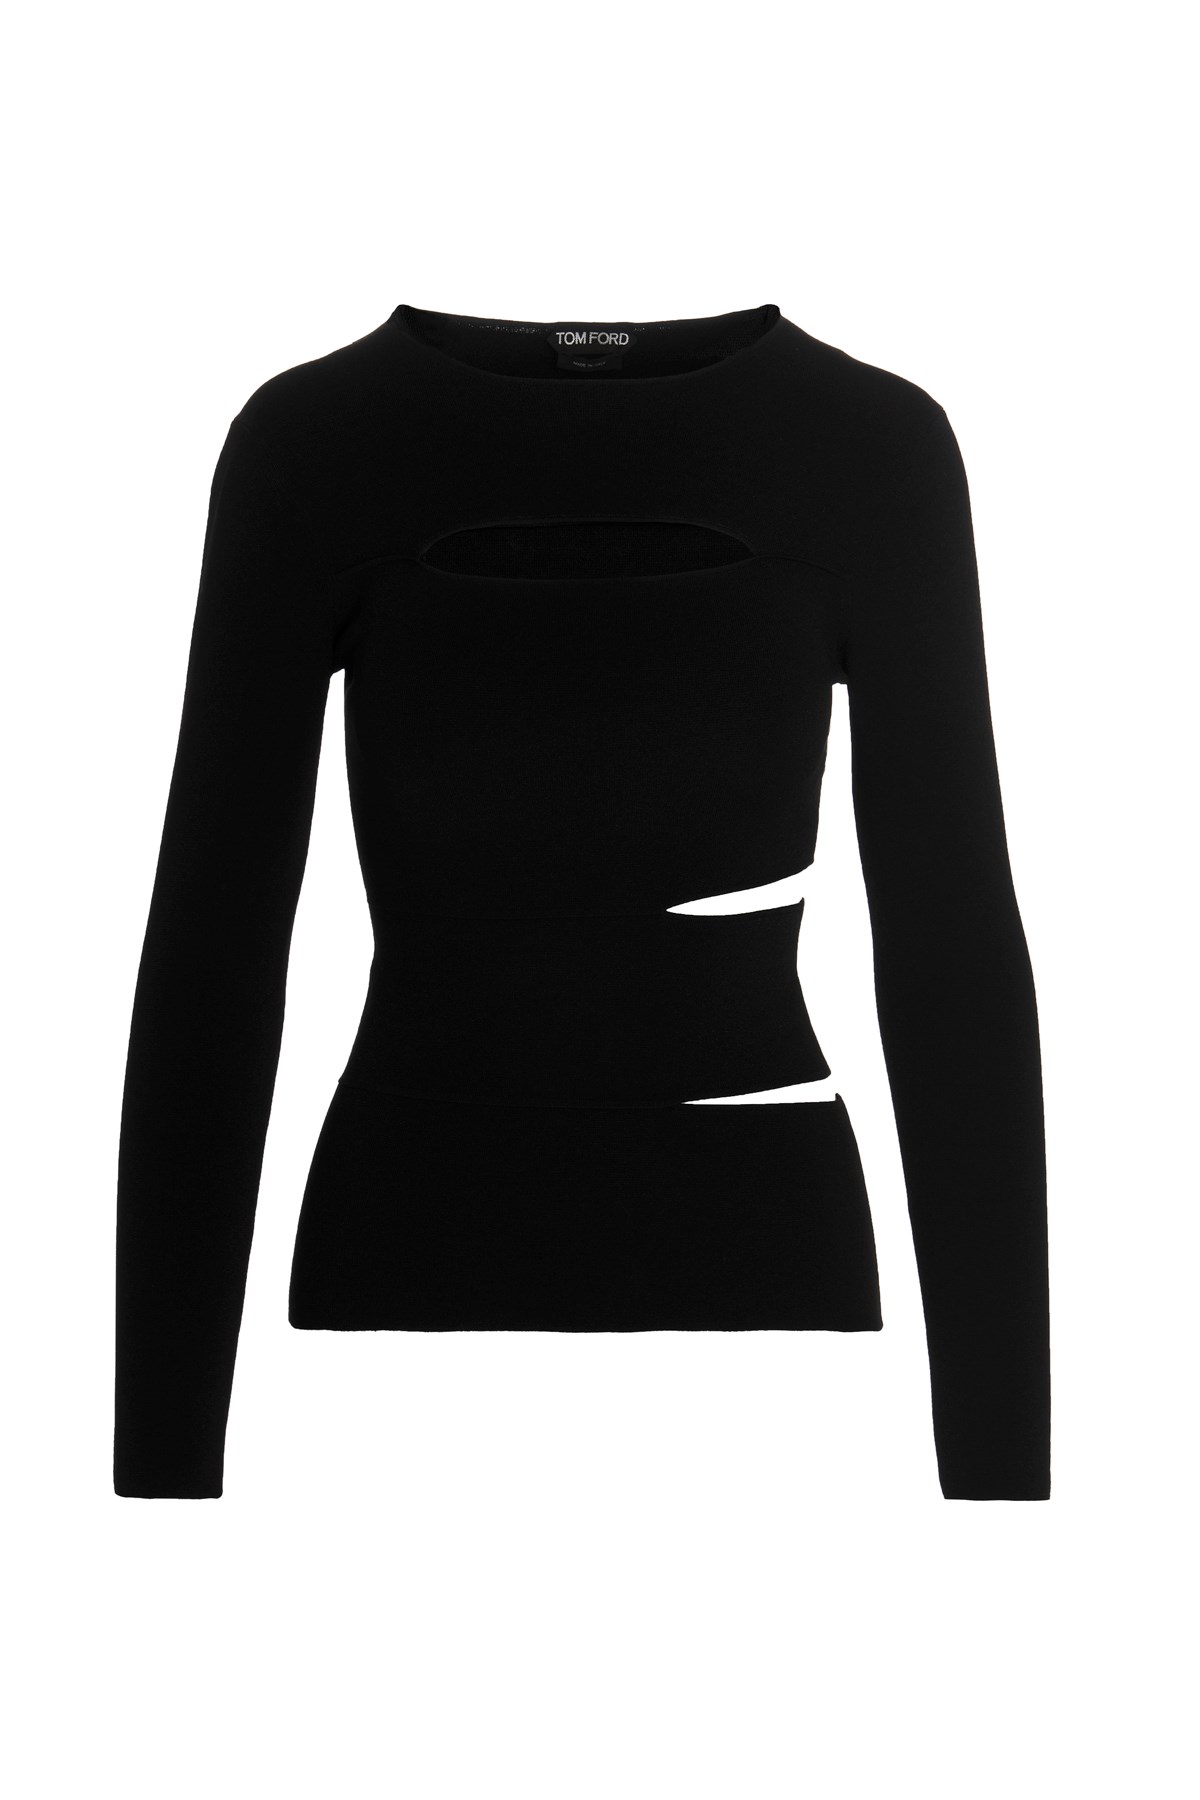 TOM FORD Cut-Out Detail Sweater